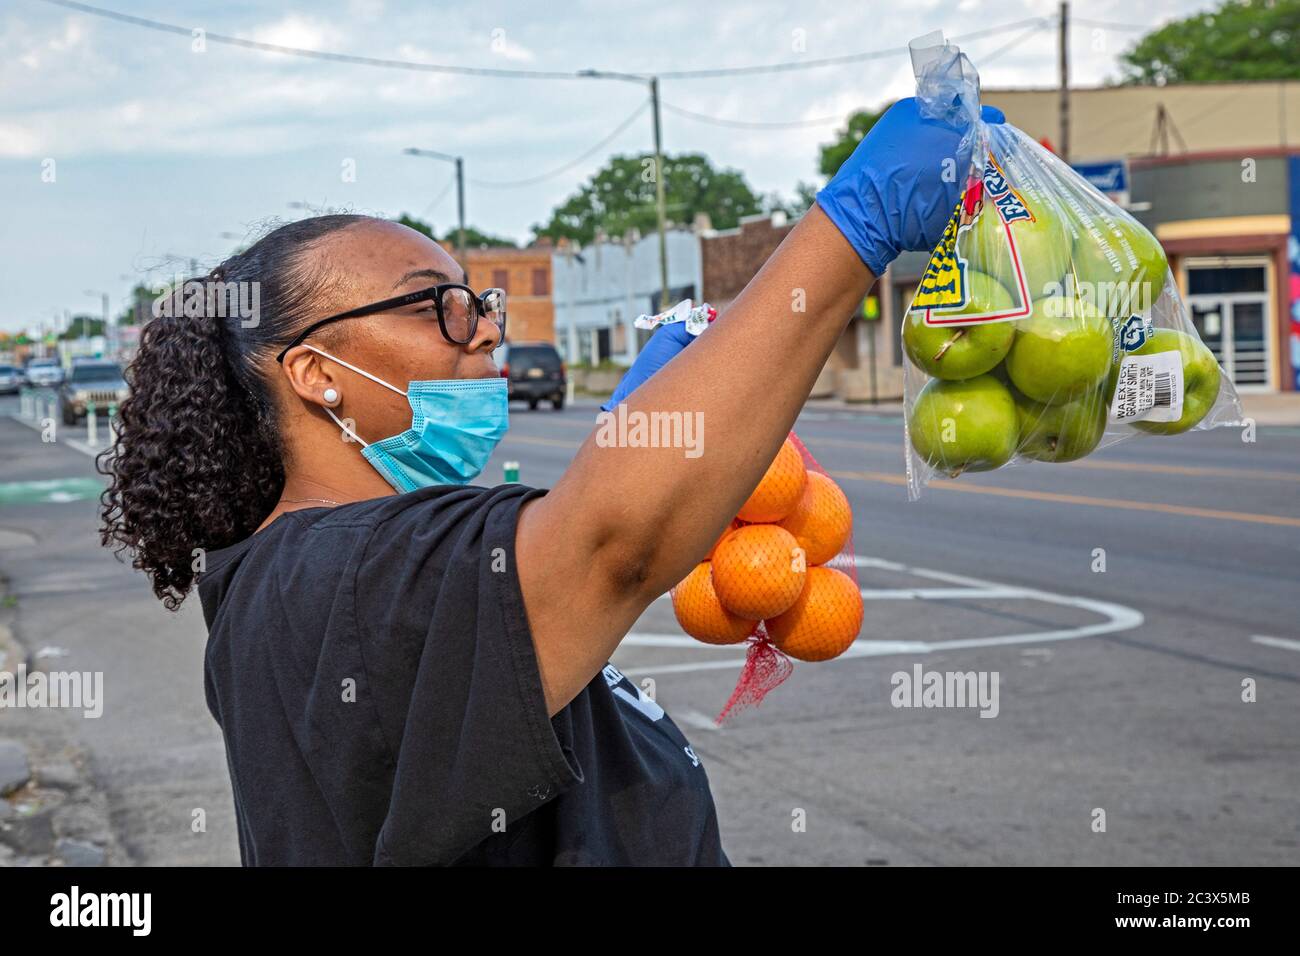 Detroit, Michigan - Members of Saved by Grace Christian Ministries hand out free fruit and vegetables in front of their church during the coronavirus Stock Photo